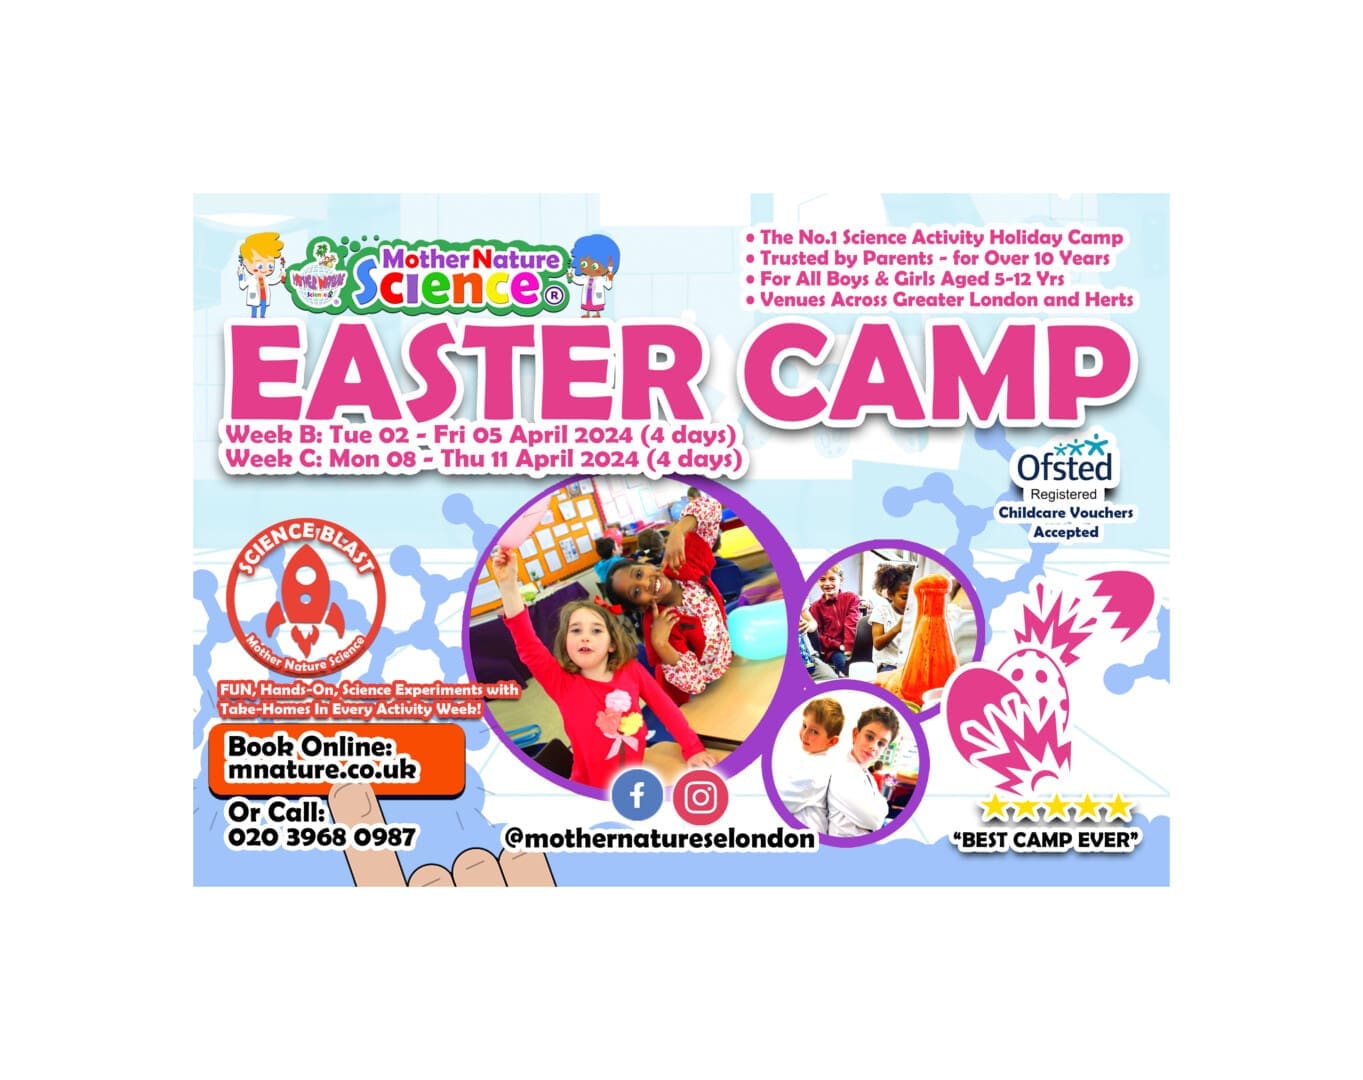 Mother Nature Science SE London Easter Camp at St Judes Primary School